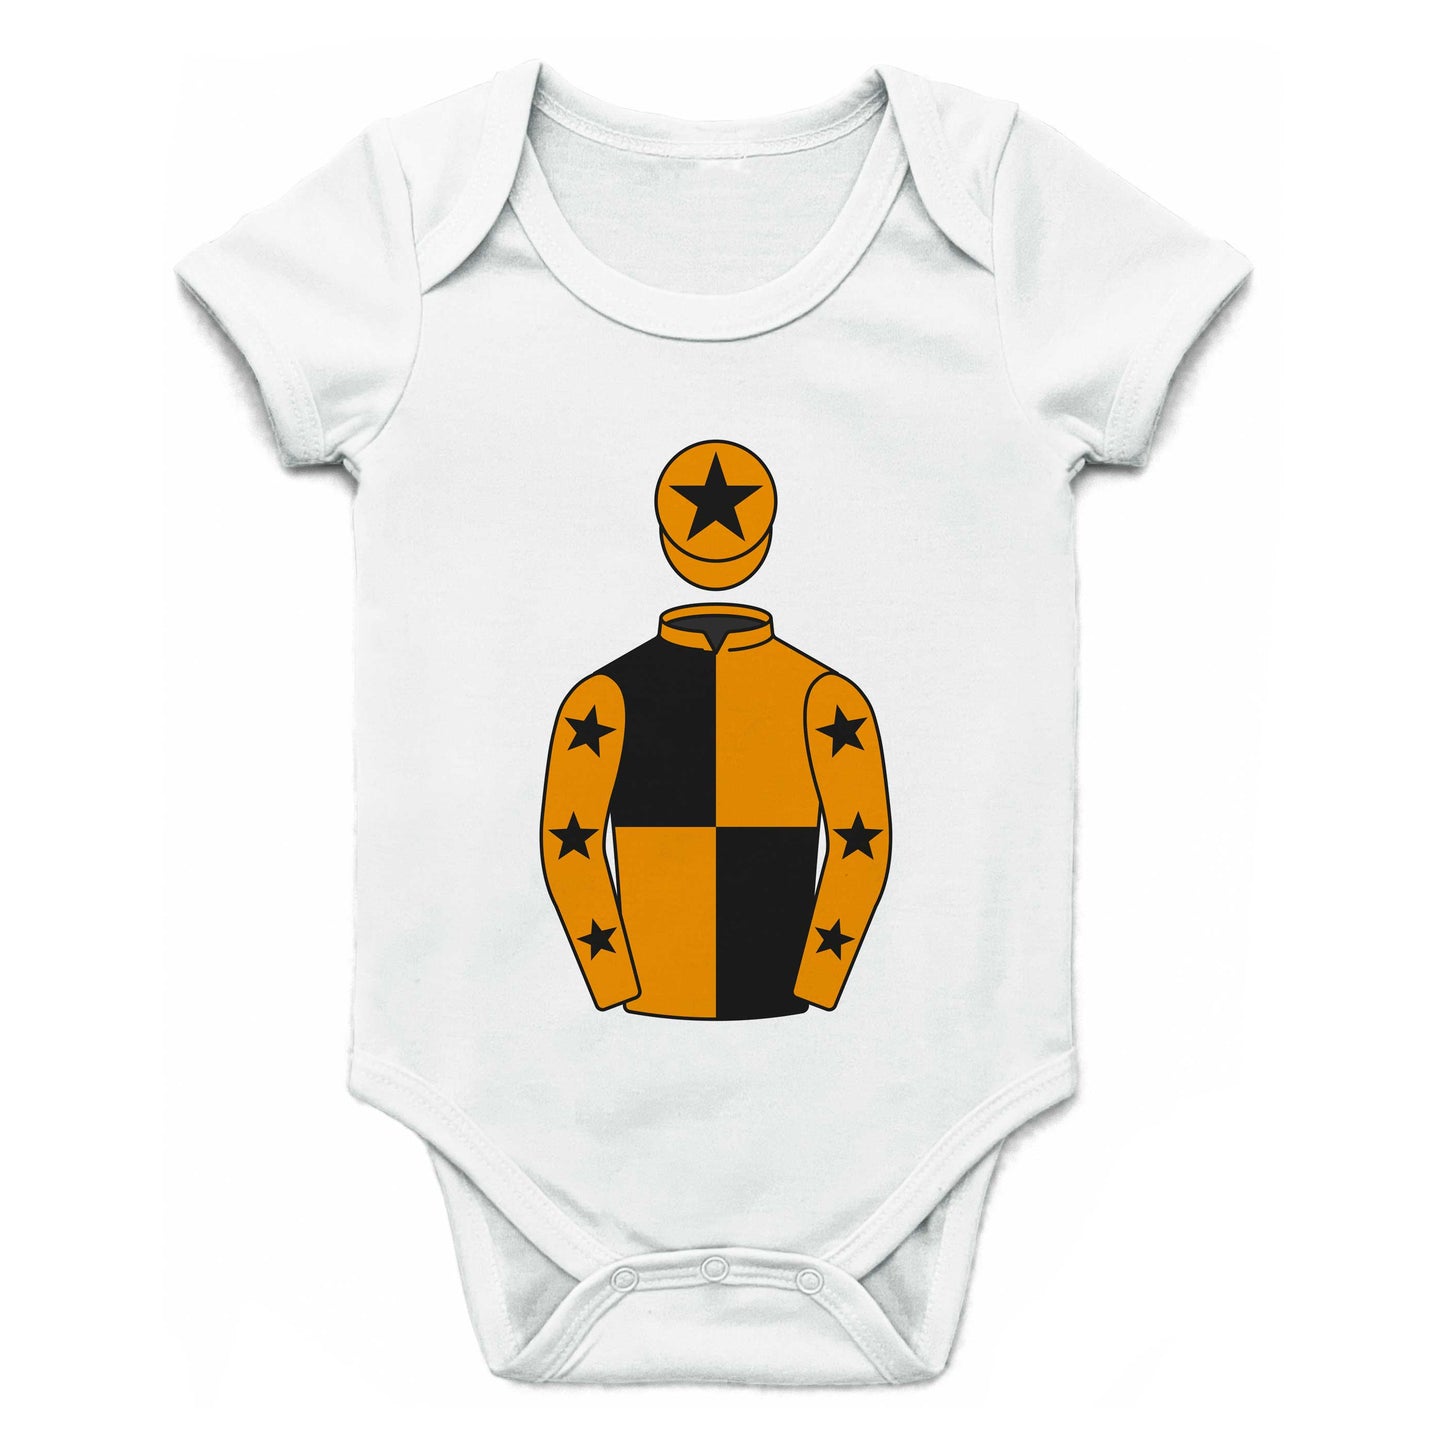 One For Luck Racing Syndicate Single Silks Baby Grow - Baby Grow - Hacked Up